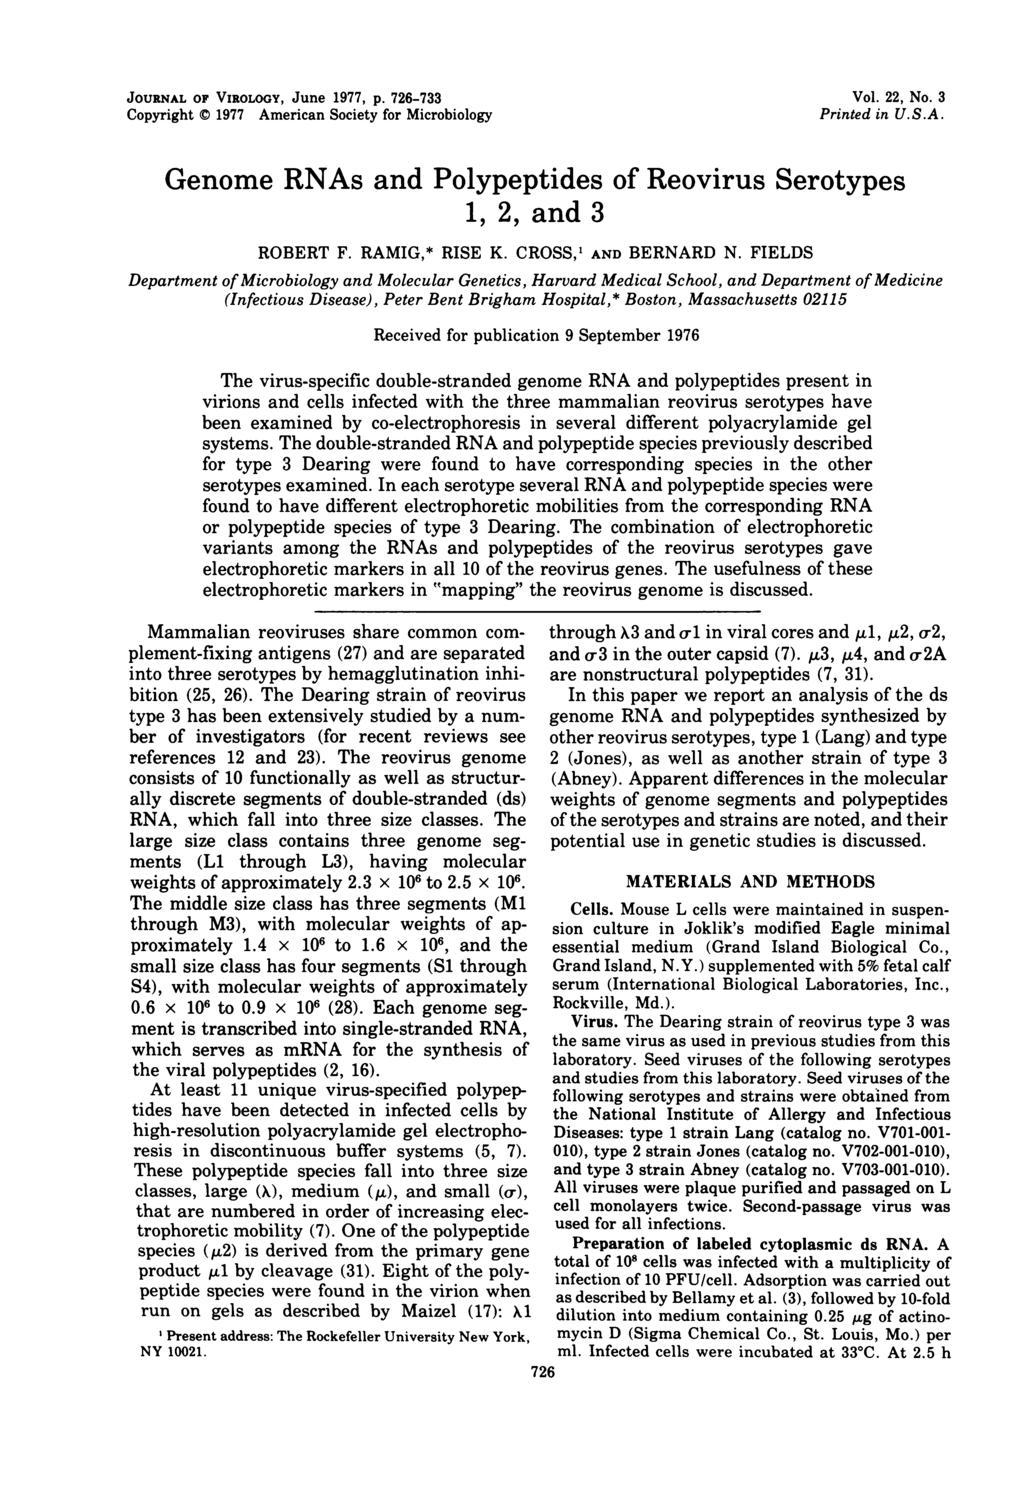 JOURNAL OF VIROLOGY, June 1977, p. 726-733 Copyright 1977 American Society for Microbiology Vol. 22, No. 3 Printed in U.S.A. Genome RNAs and Polypeptides of Reovirus Serotypes 1, 2, and 3 ROBERT F.